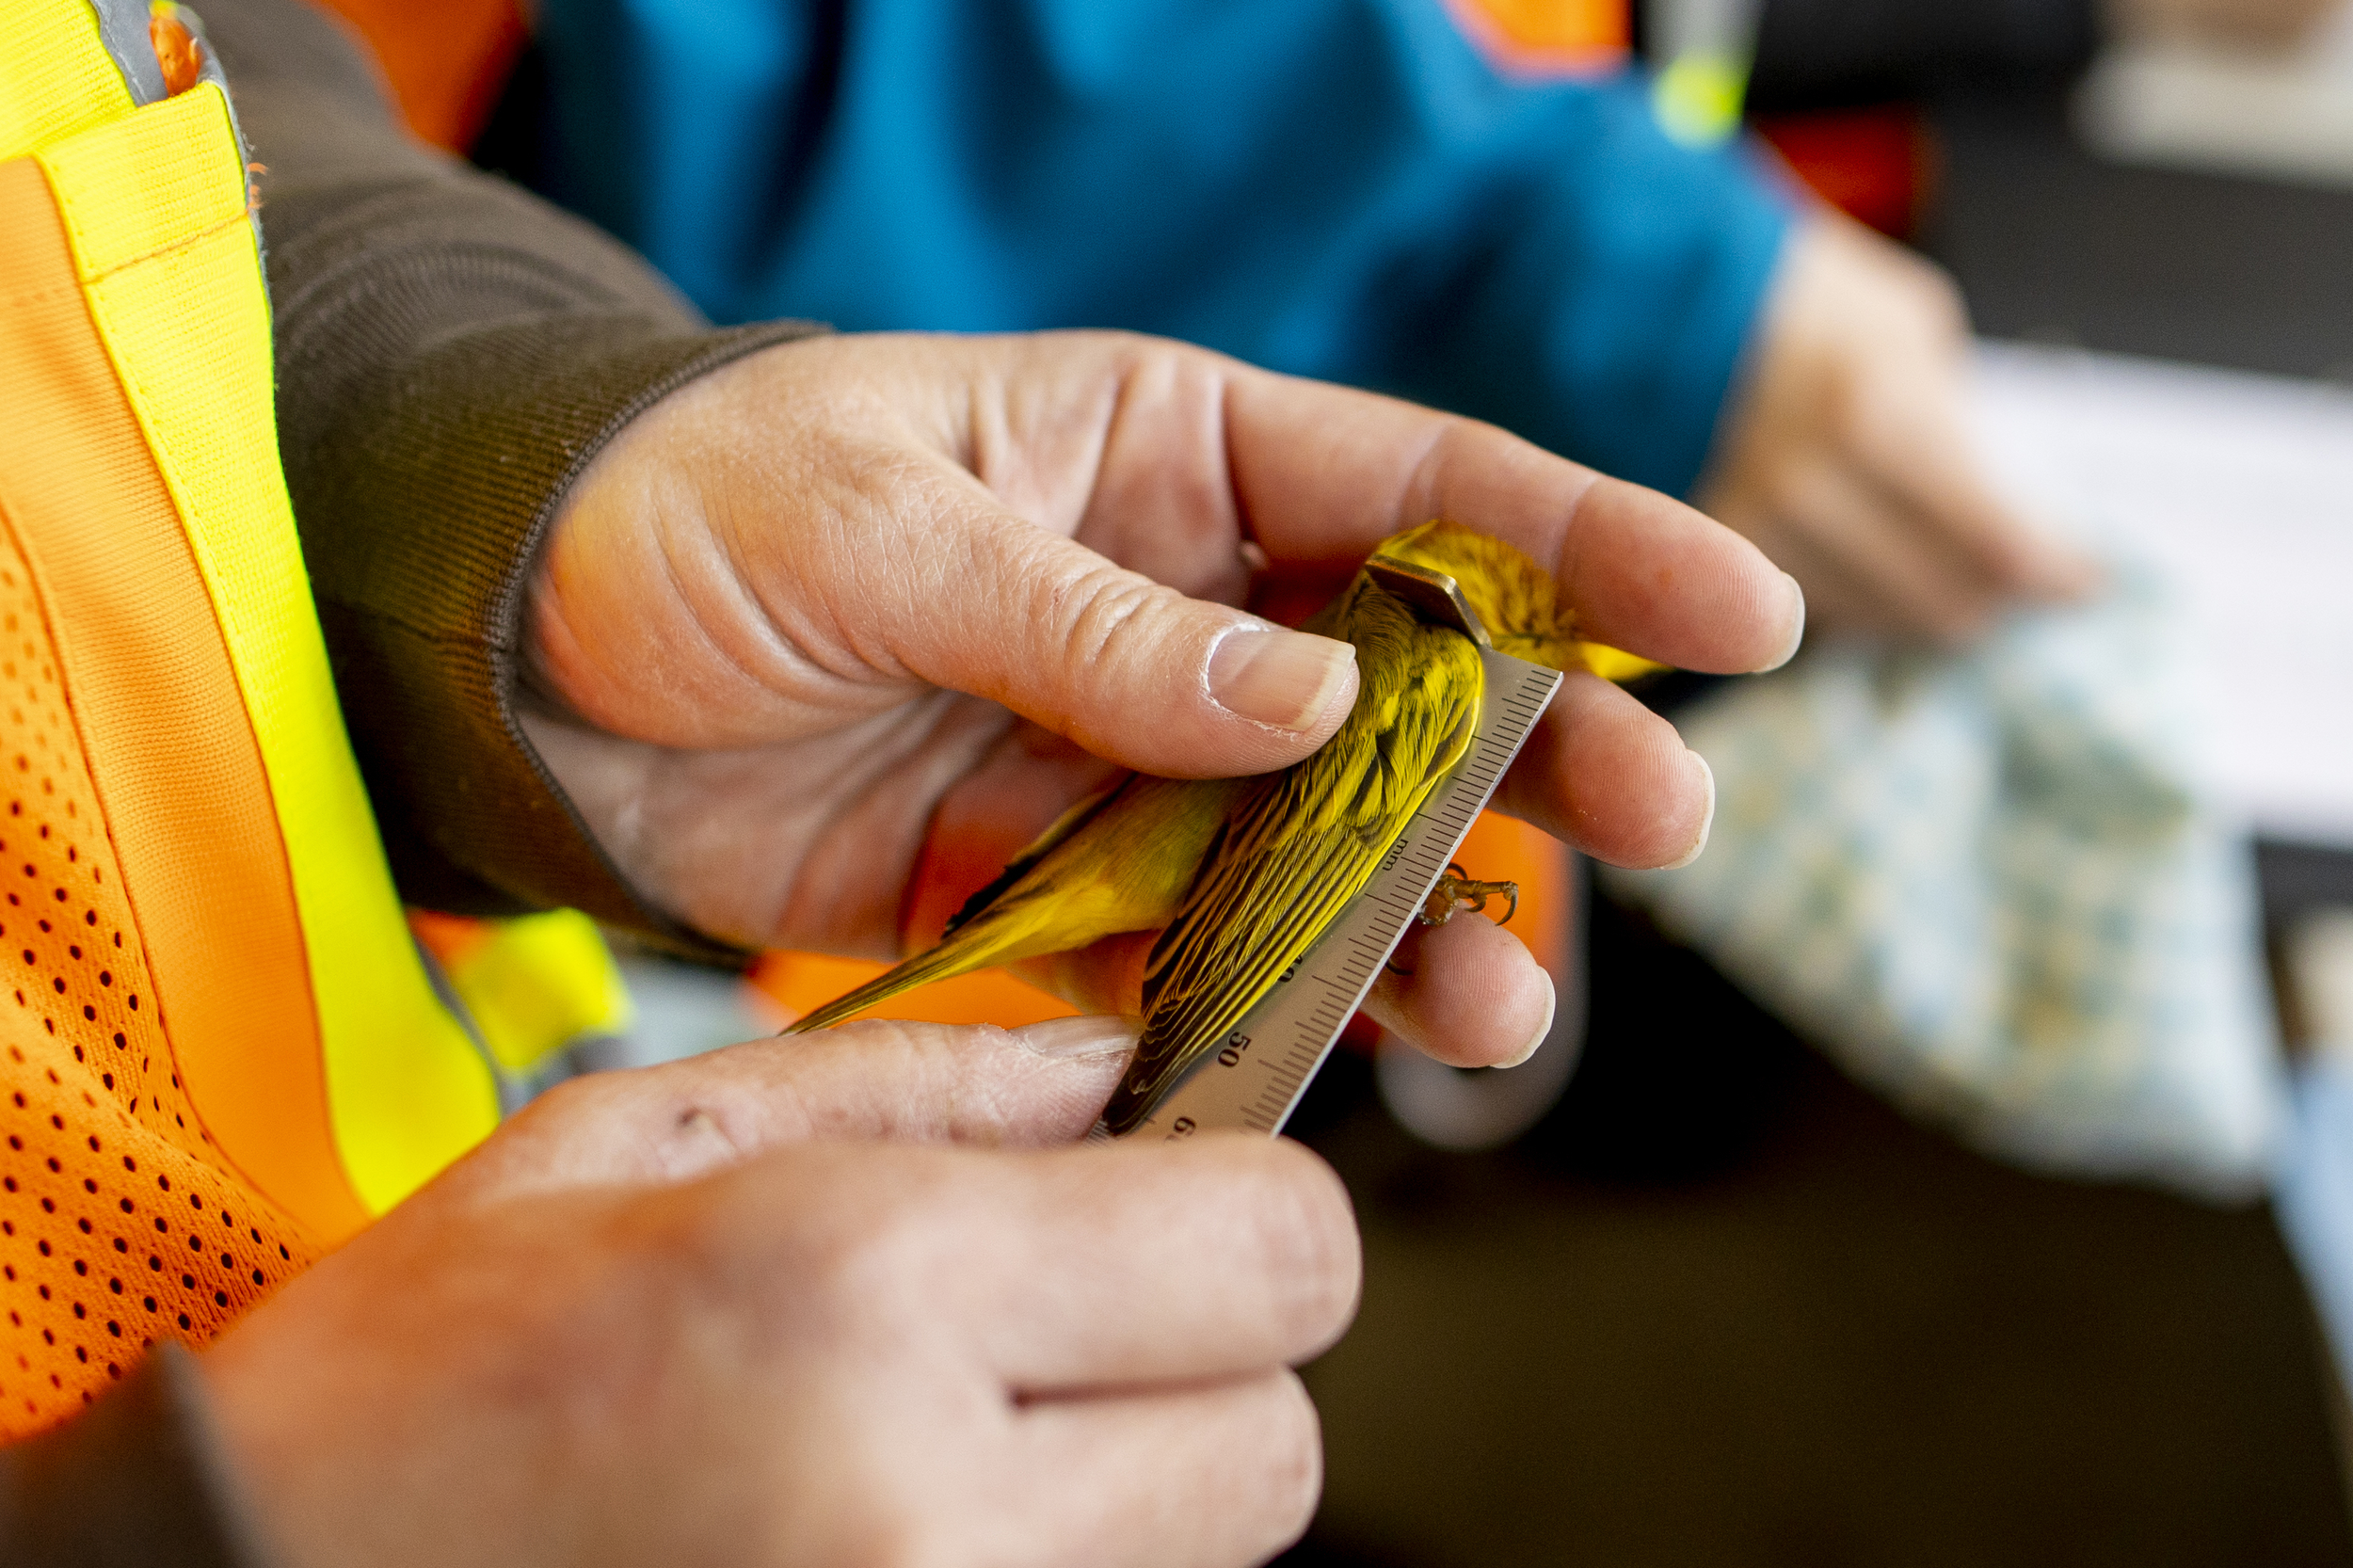 A woman uses a ruler to measure the wings of a tiny yellow and brown striped bird